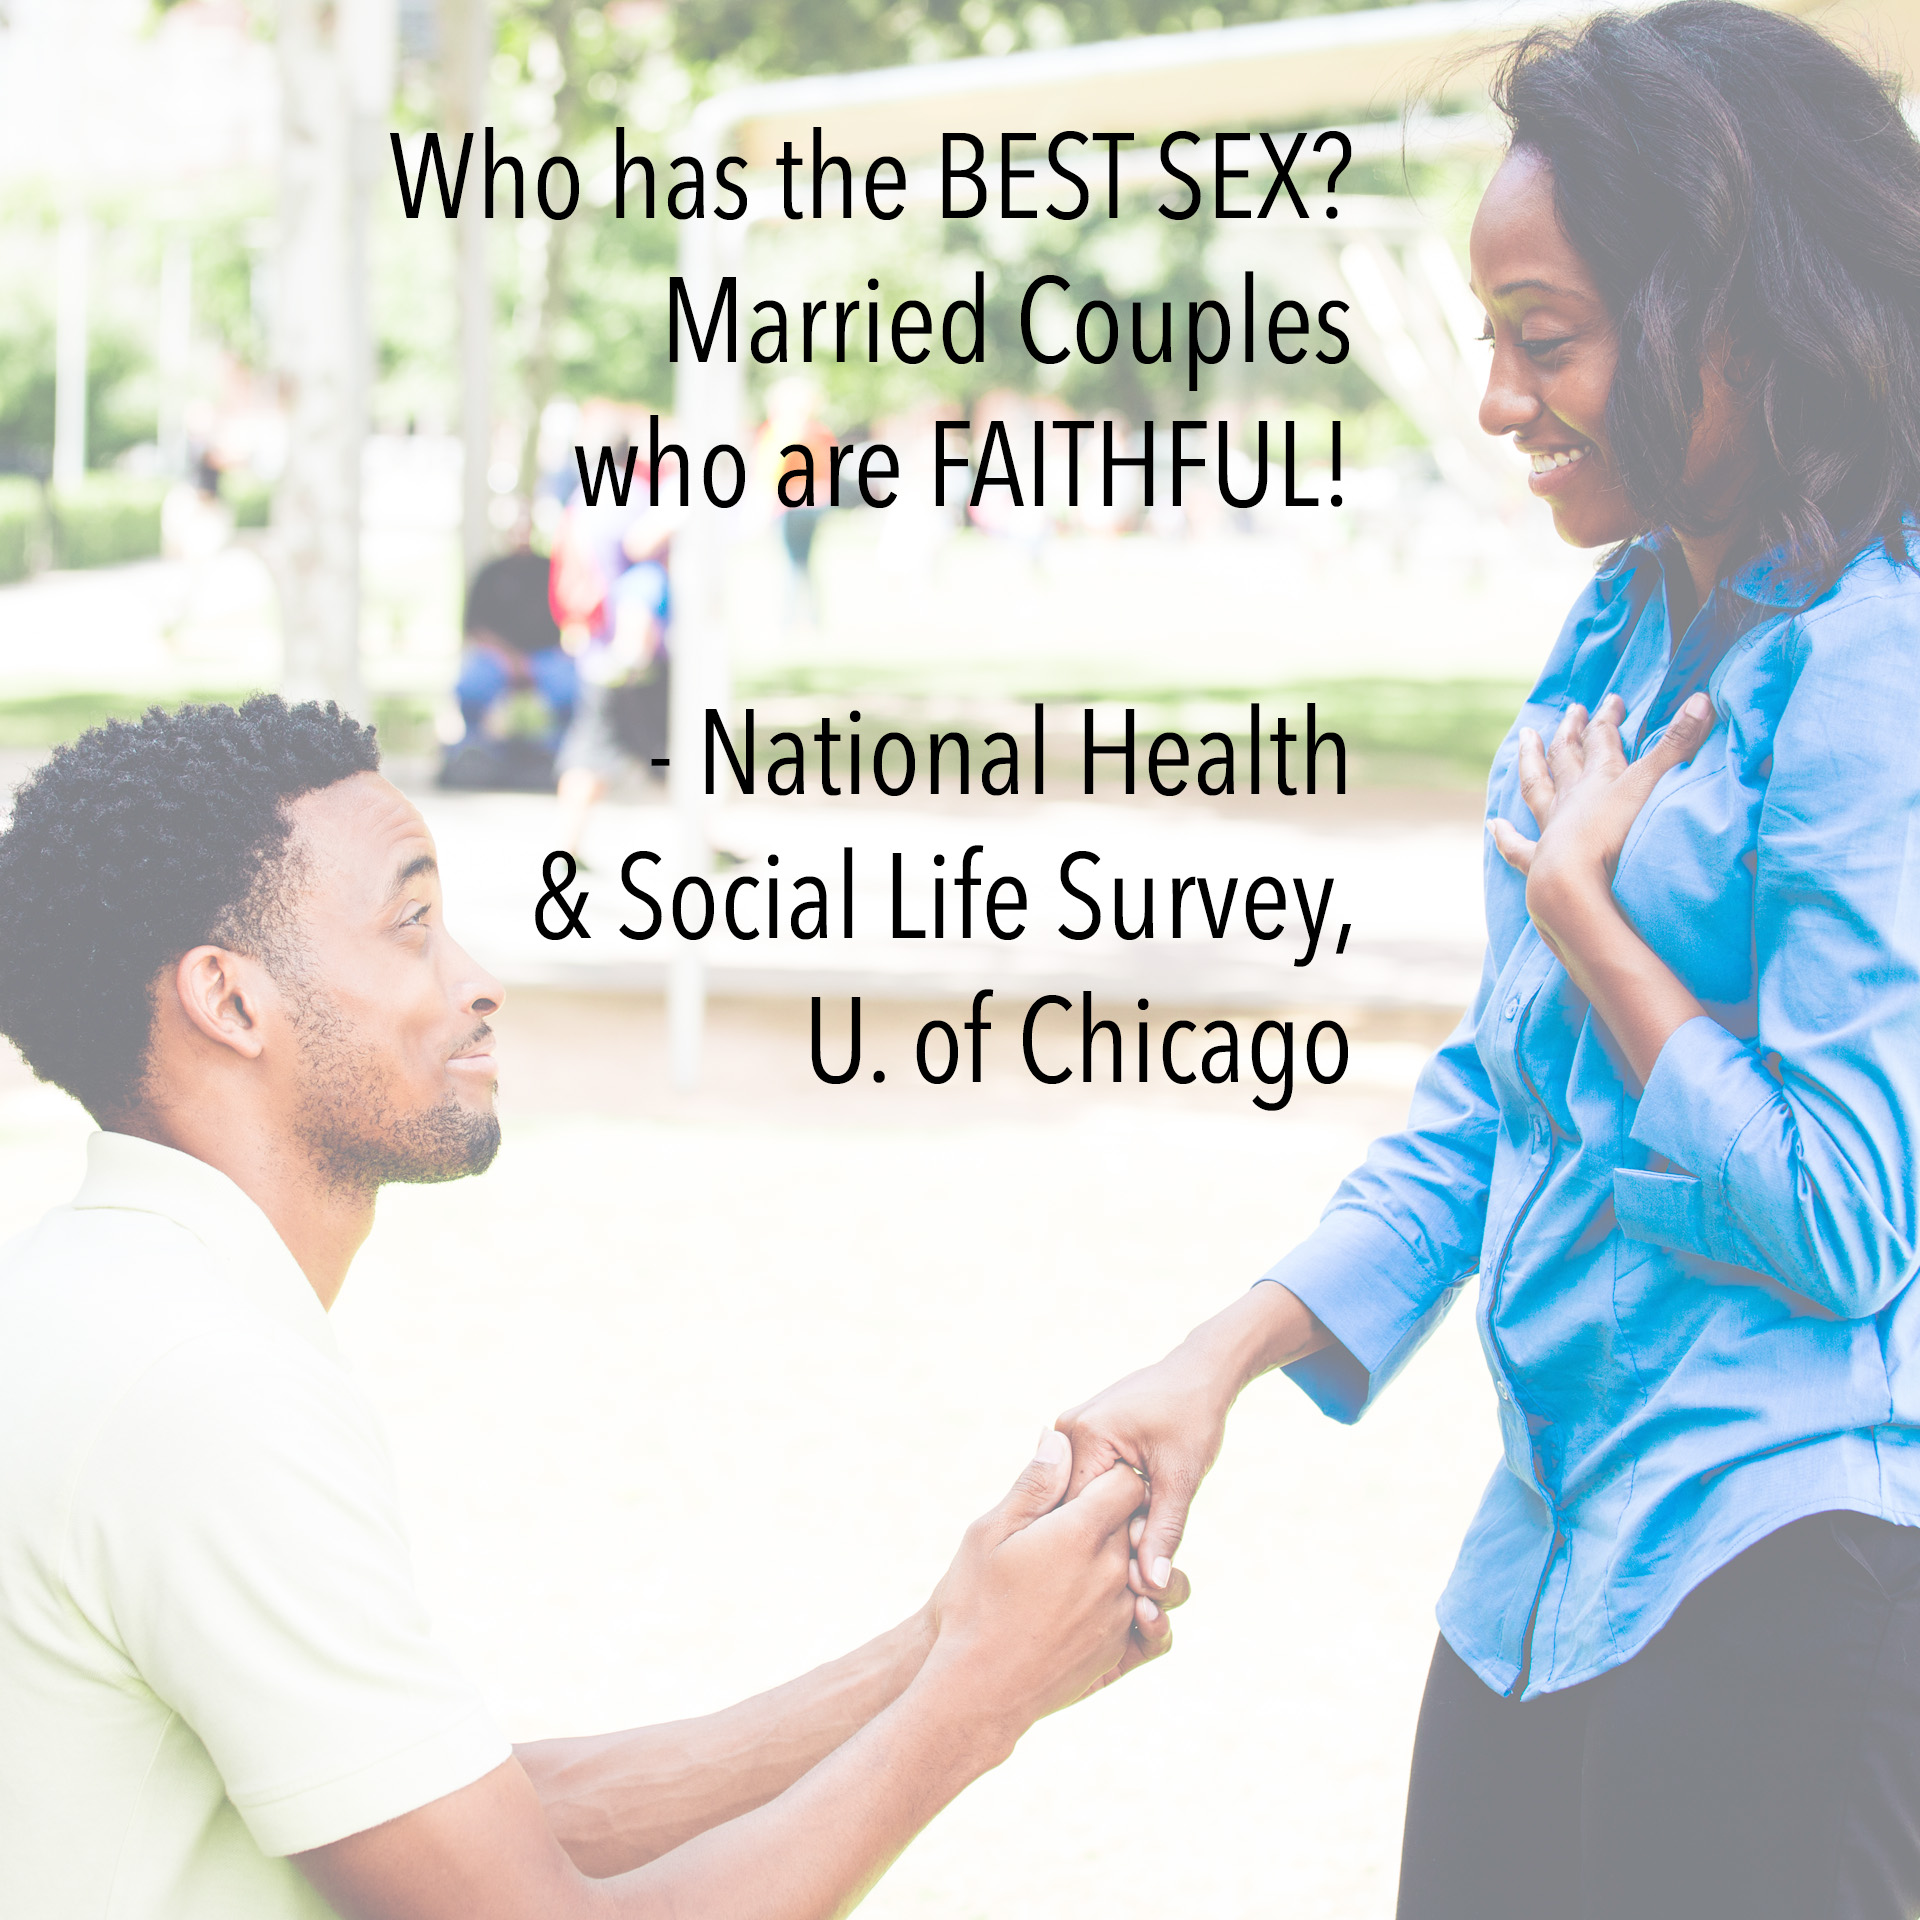 Who has the BEST SEX? Married Couples who are FAITHFUL! - National Health & Social Life Survey, U. of Chicago